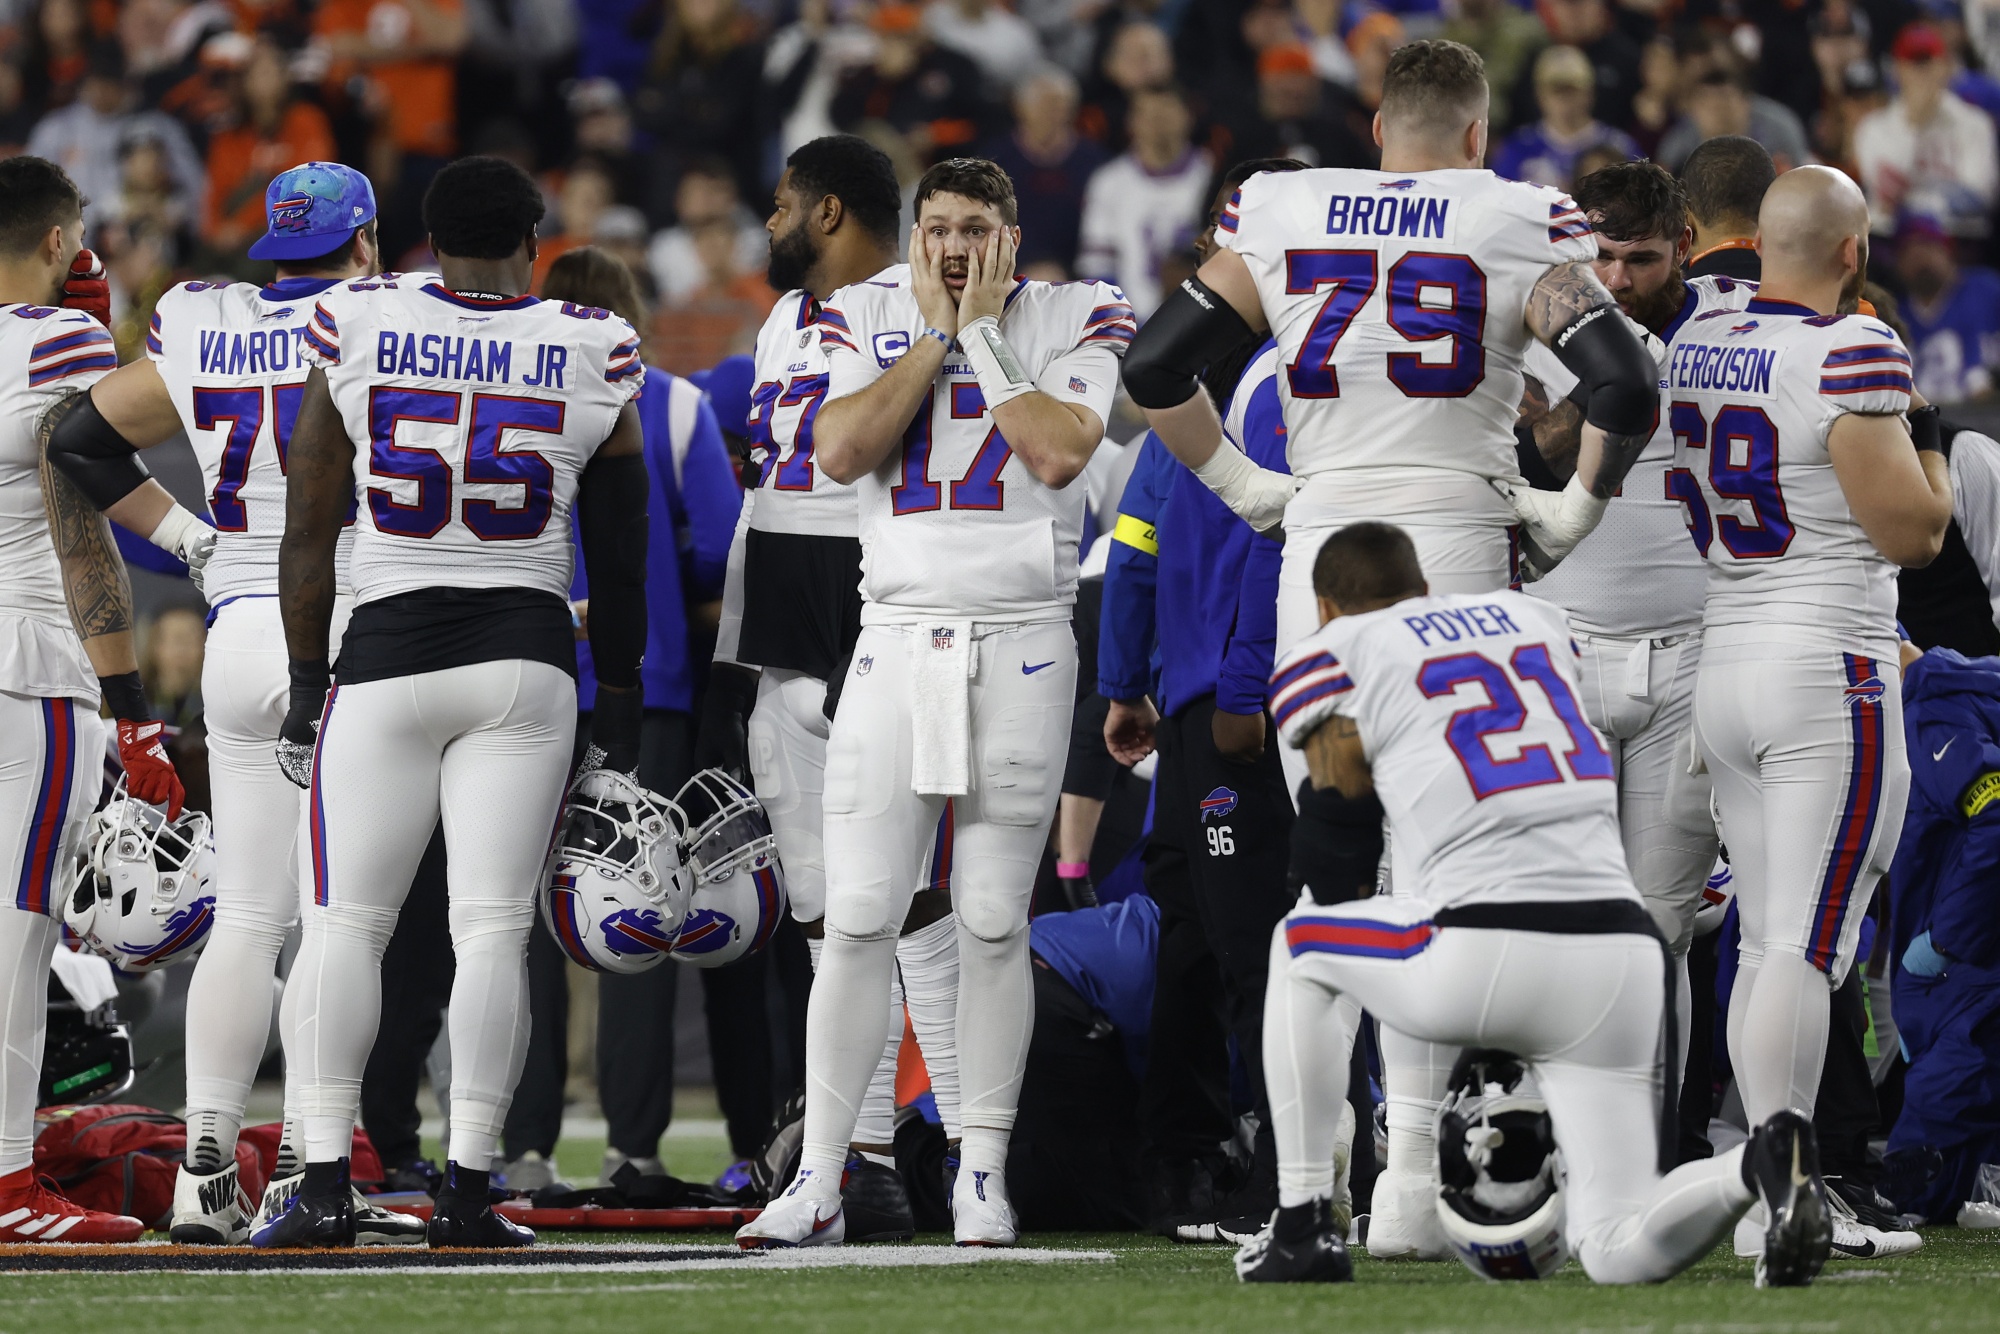 Want to go to the Buffalo Bills-Cincinnati Bengals game? Be prepared to pay